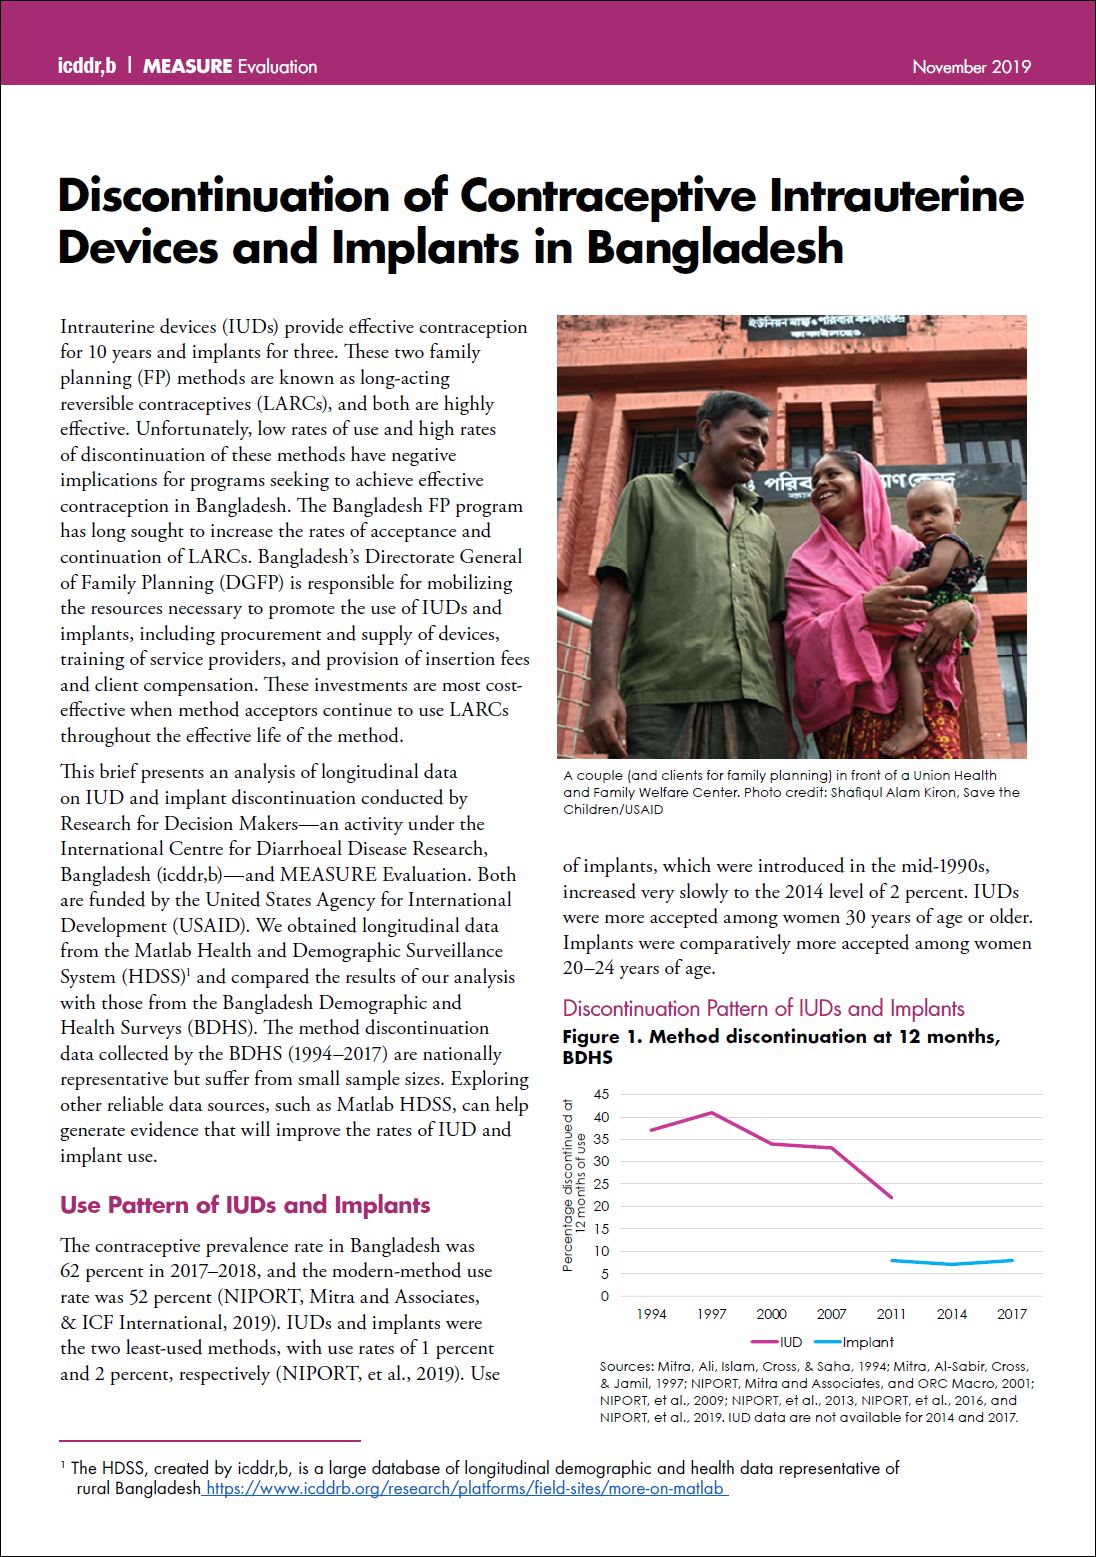 Discontinuation of Contraceptive Intrauterine Devices and Implants in Bangladesh